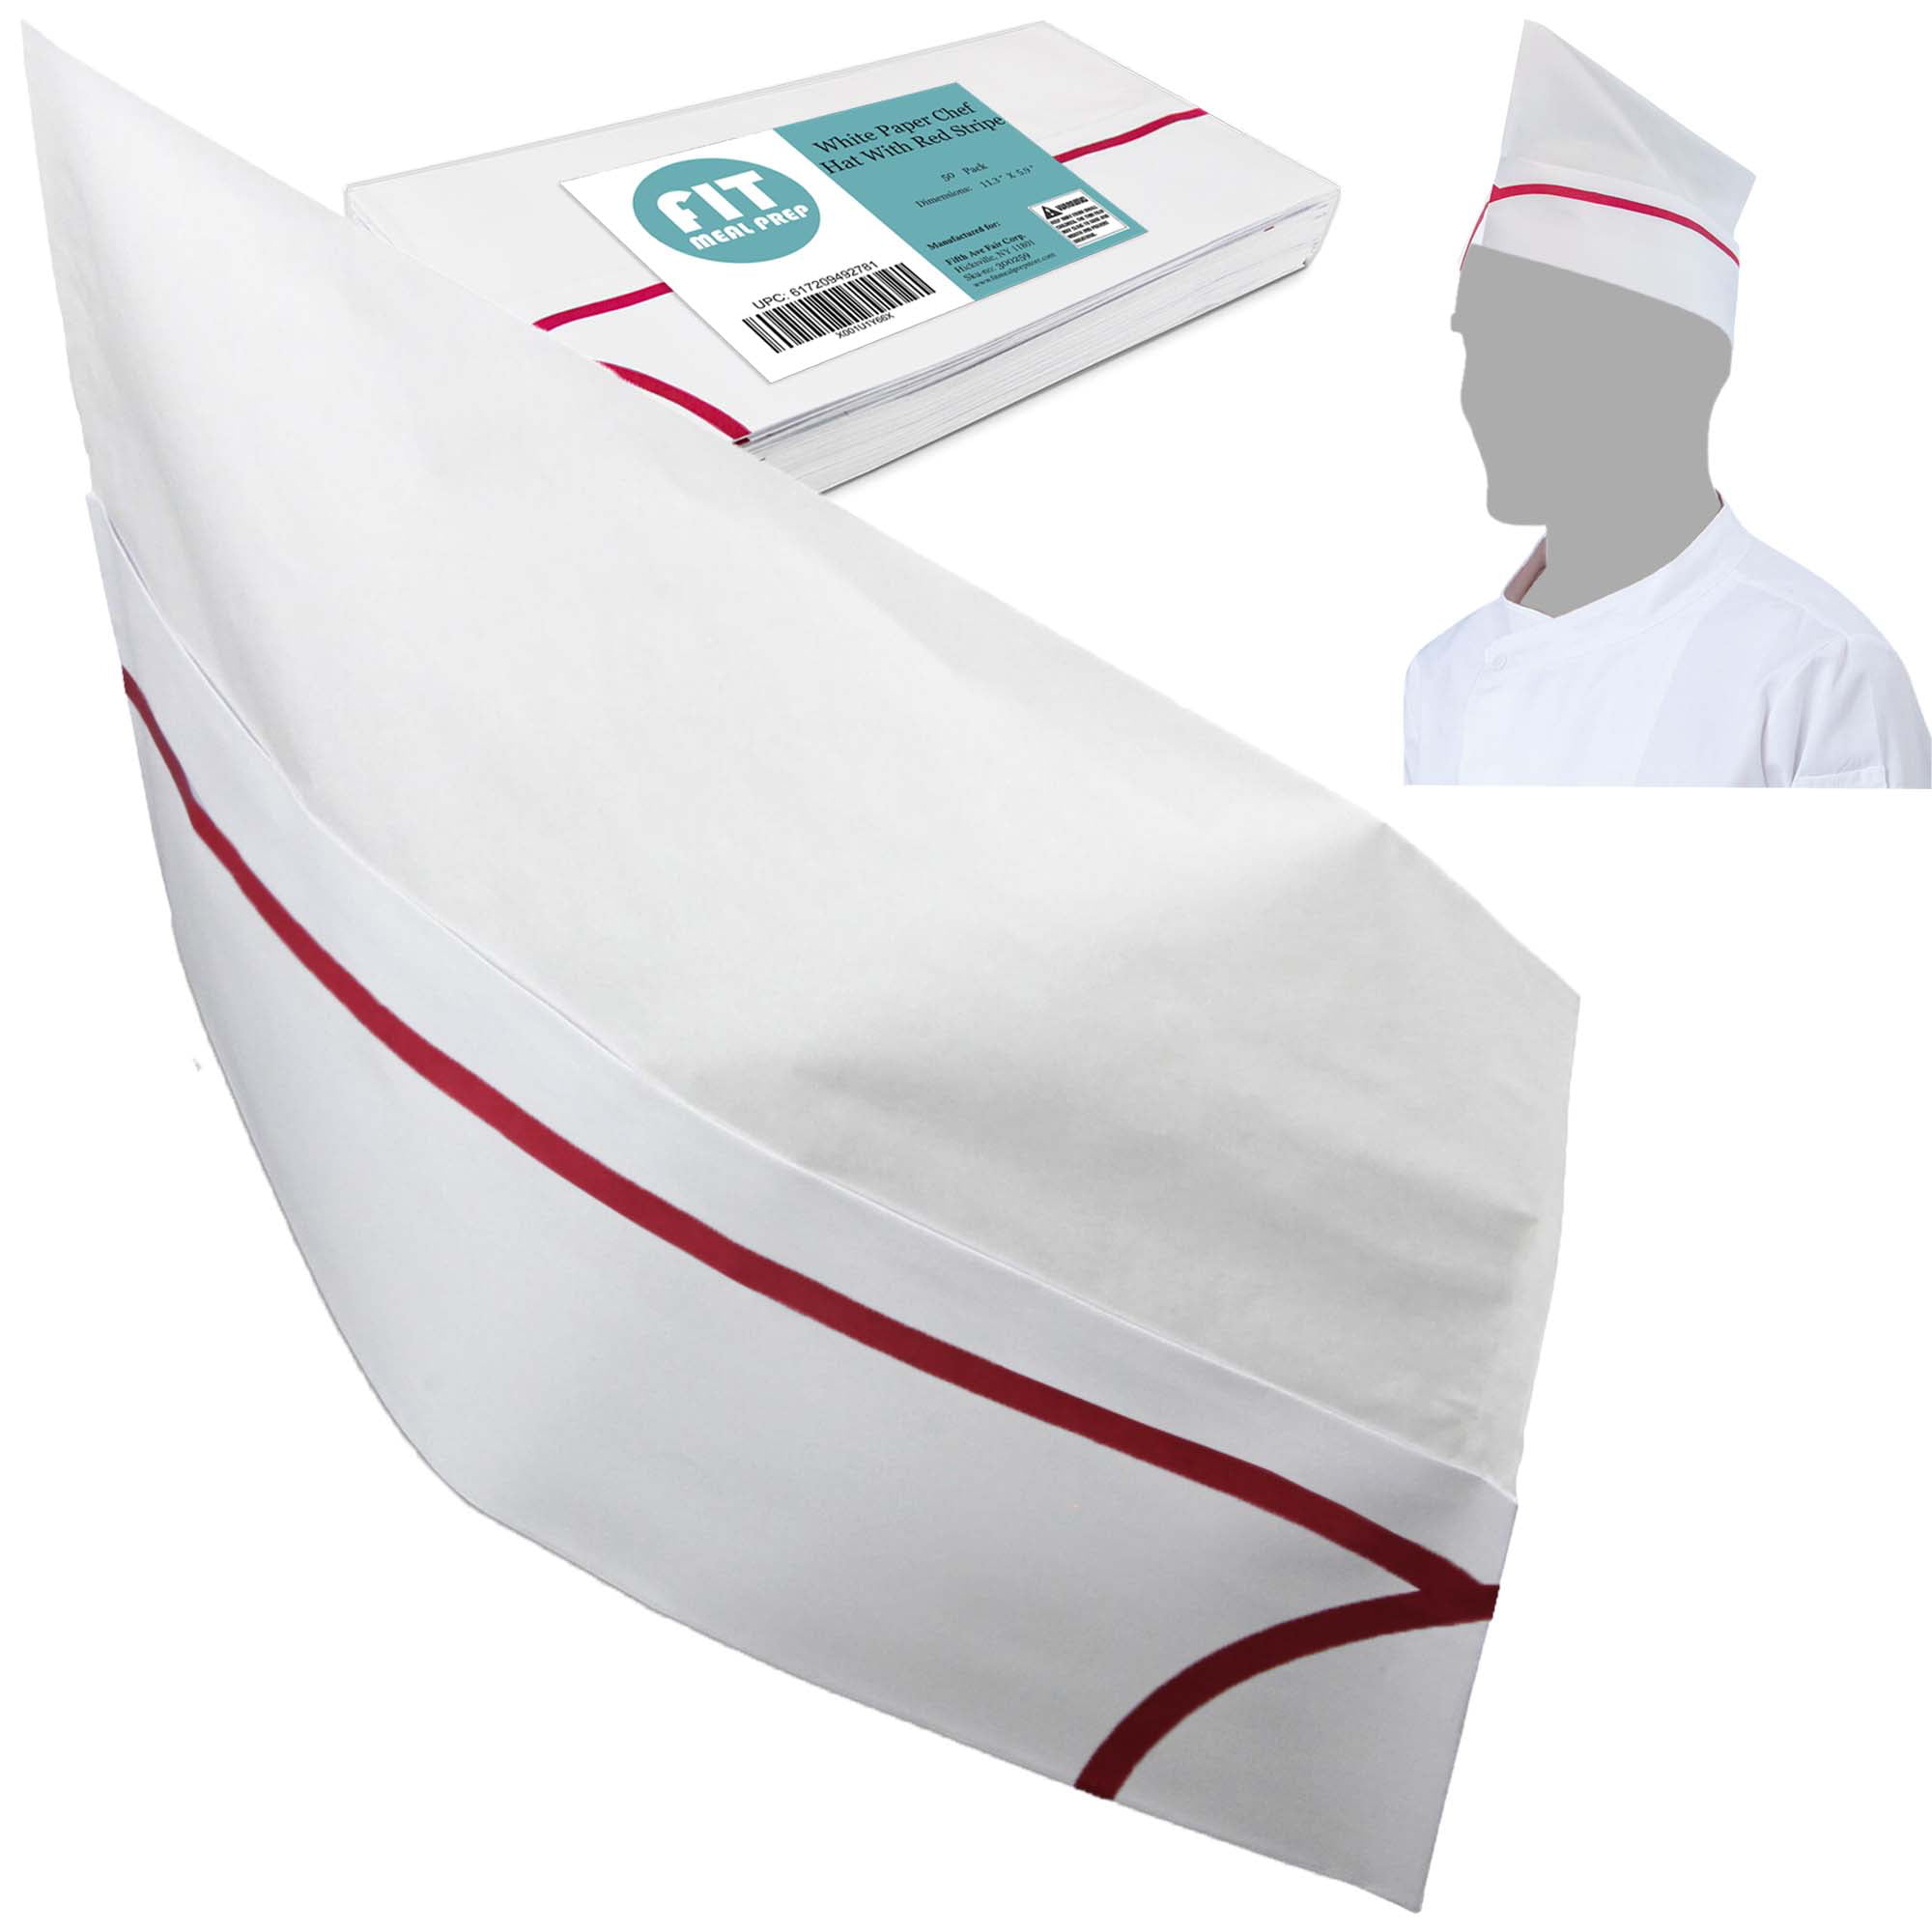 Paper Forage Hats White Disposable Catering Chef Hat Adjustable in Packs of 100 